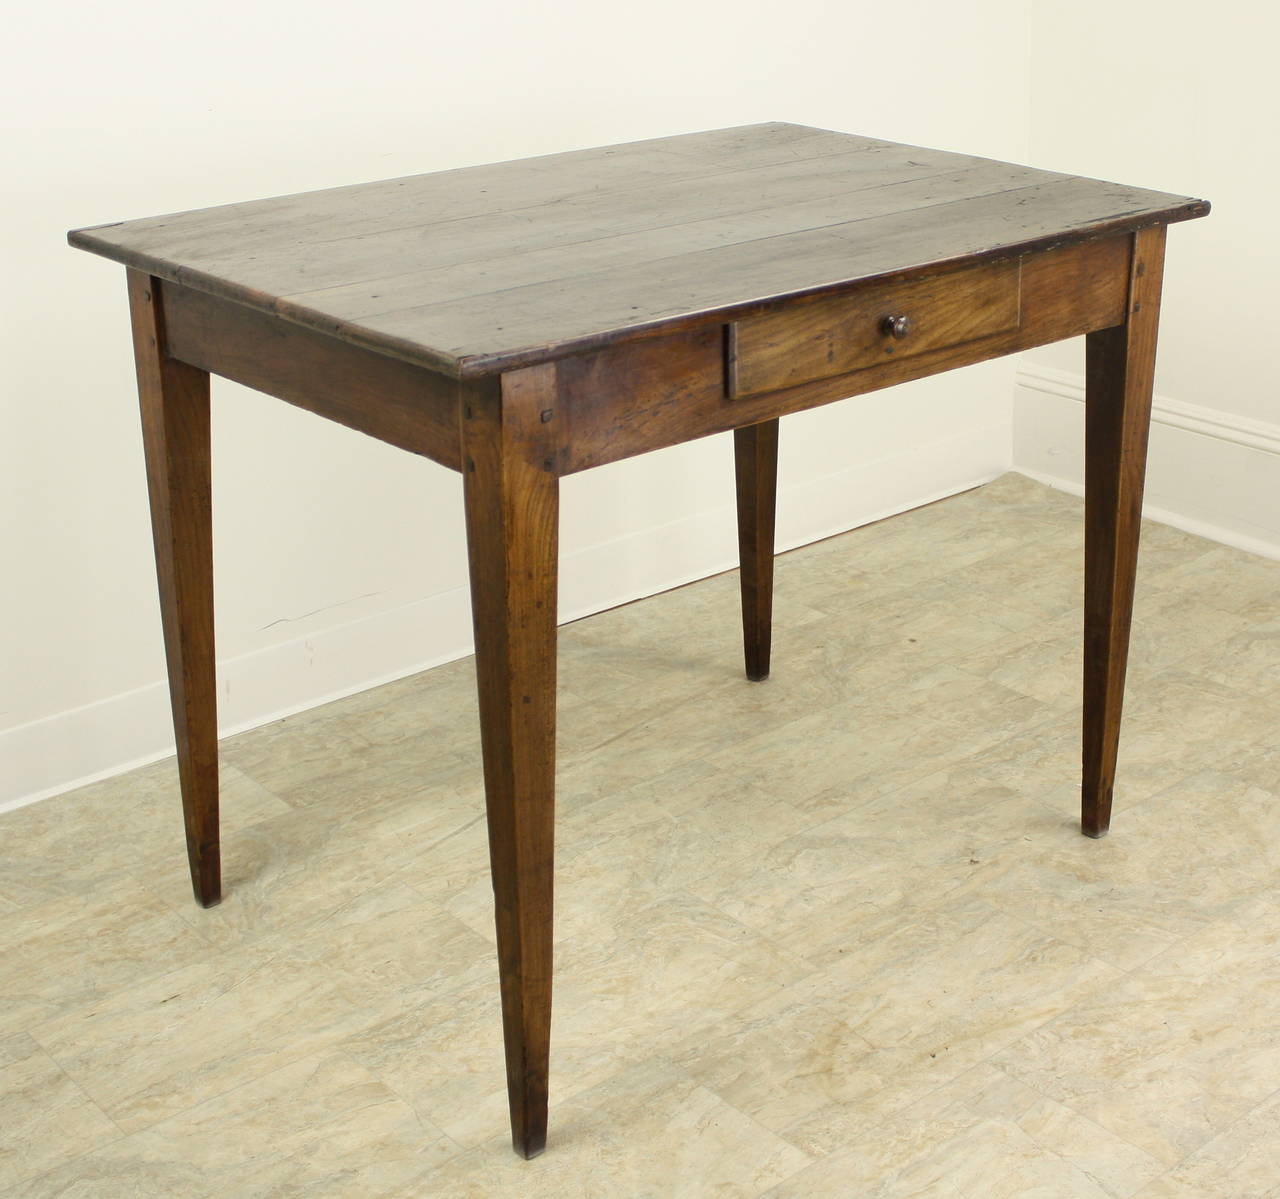 A fine example of an antique writing table, complete with warm color and nice patina.  The elegant tapered legs are nicely pegged at the apron, and the single drawer slides open easily.  Good apron height for knees at 251/2